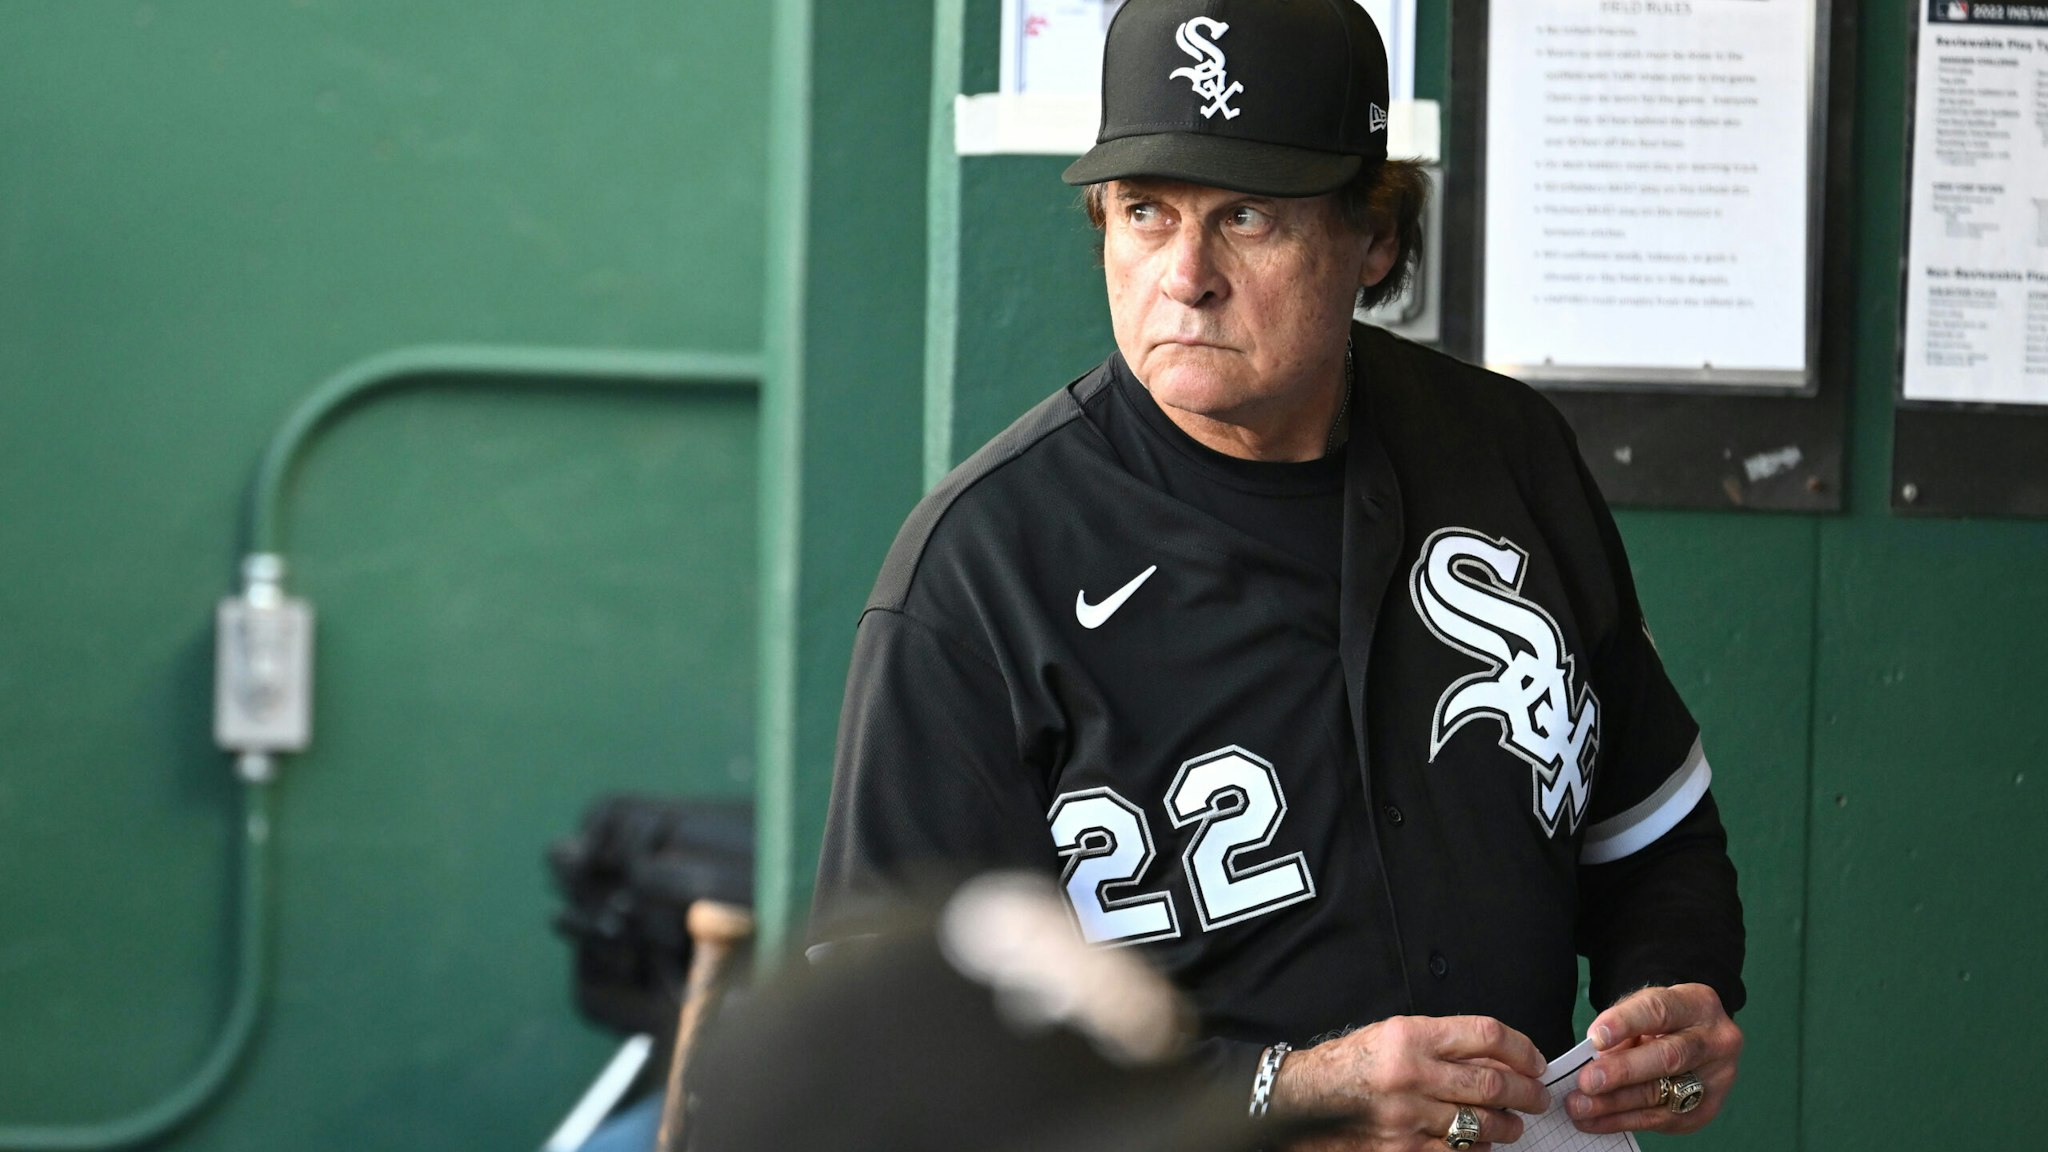 White Sox Manager Tony LaRussa's rough year got worse after a history-making triple play cost his team a possible victory Monday